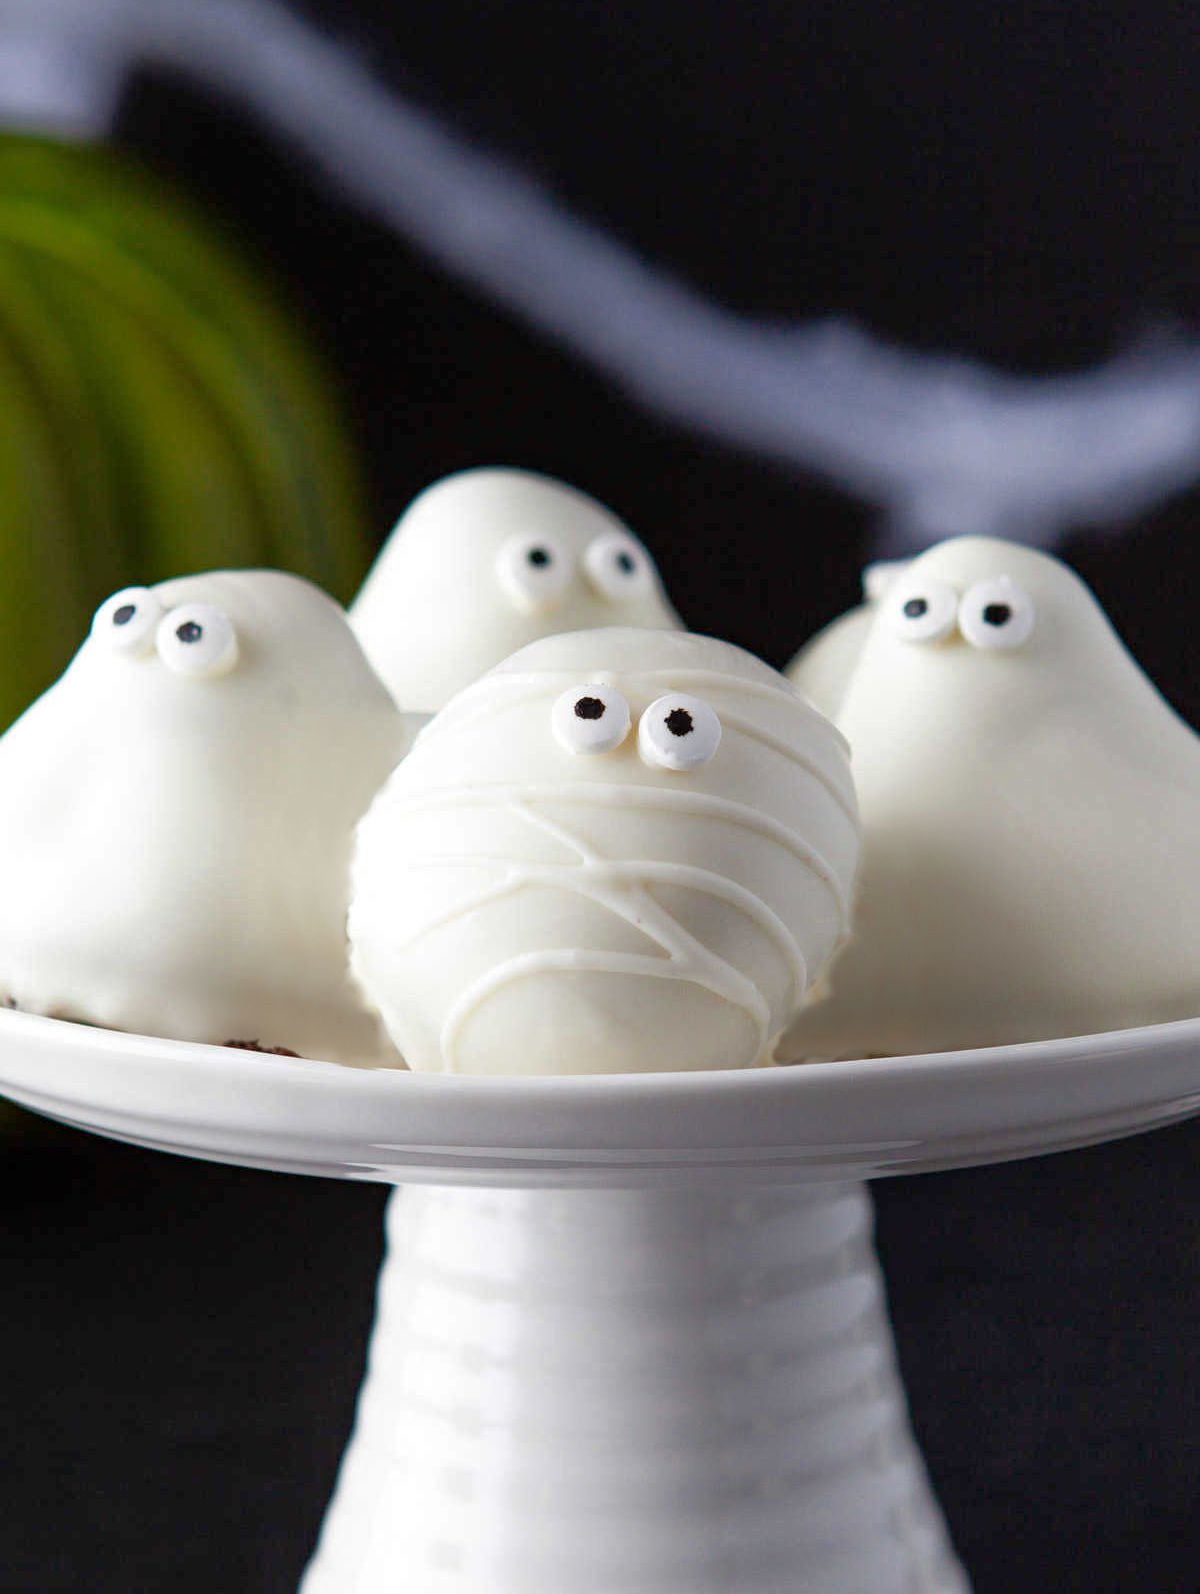 mummy and ghost oreo balls on white cake stand with green pumpkin in background.